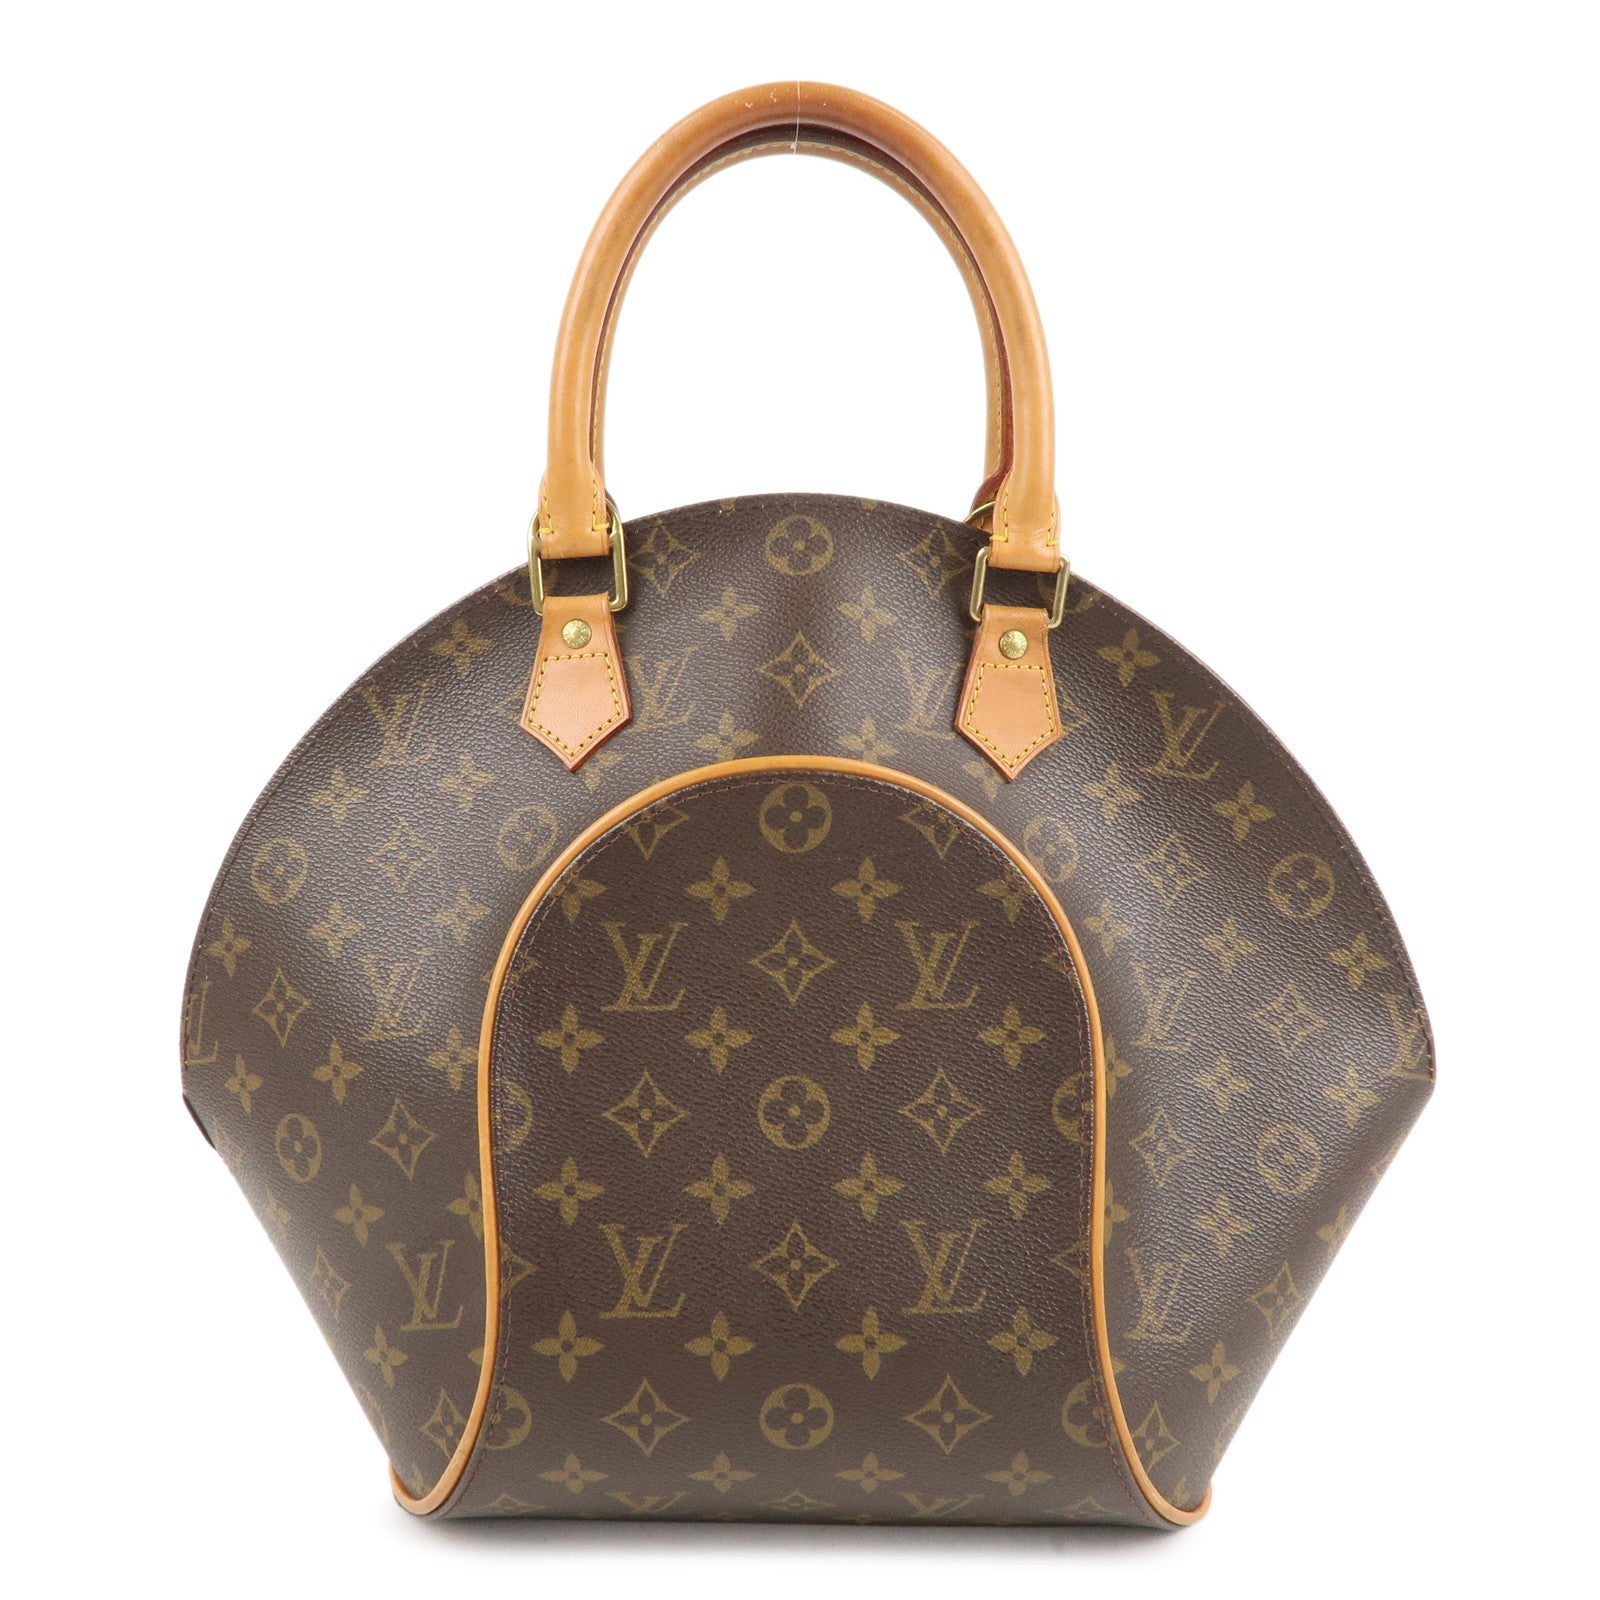 Louis Vuitton Ellipse Mm Monogram Leather Tote Preowned$995.00